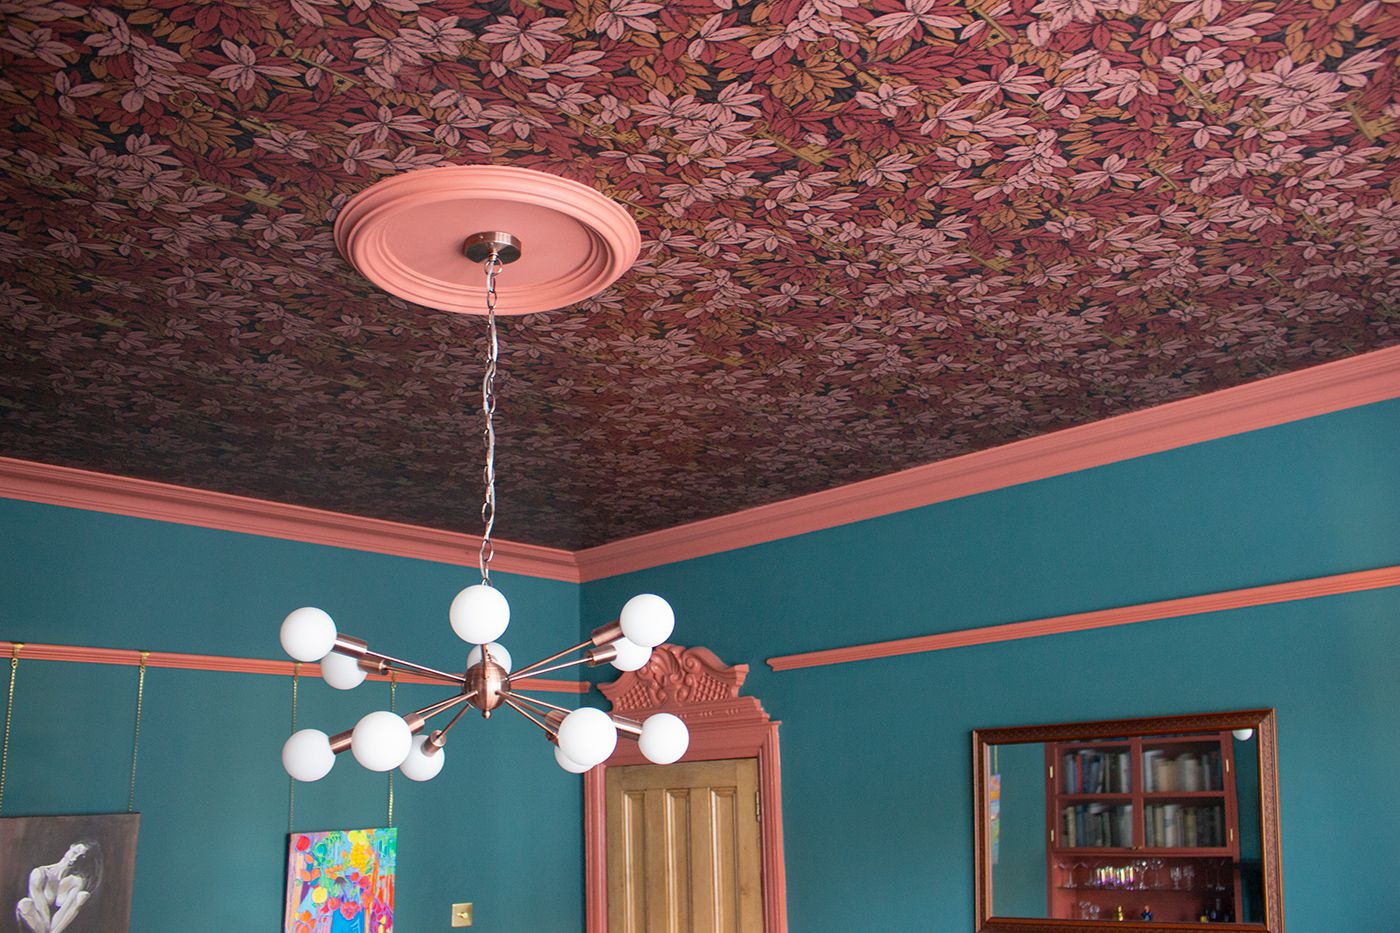 A photo showing the wallpapered ceiling with ceiling light, and the elaborate architrave around the door in the background.